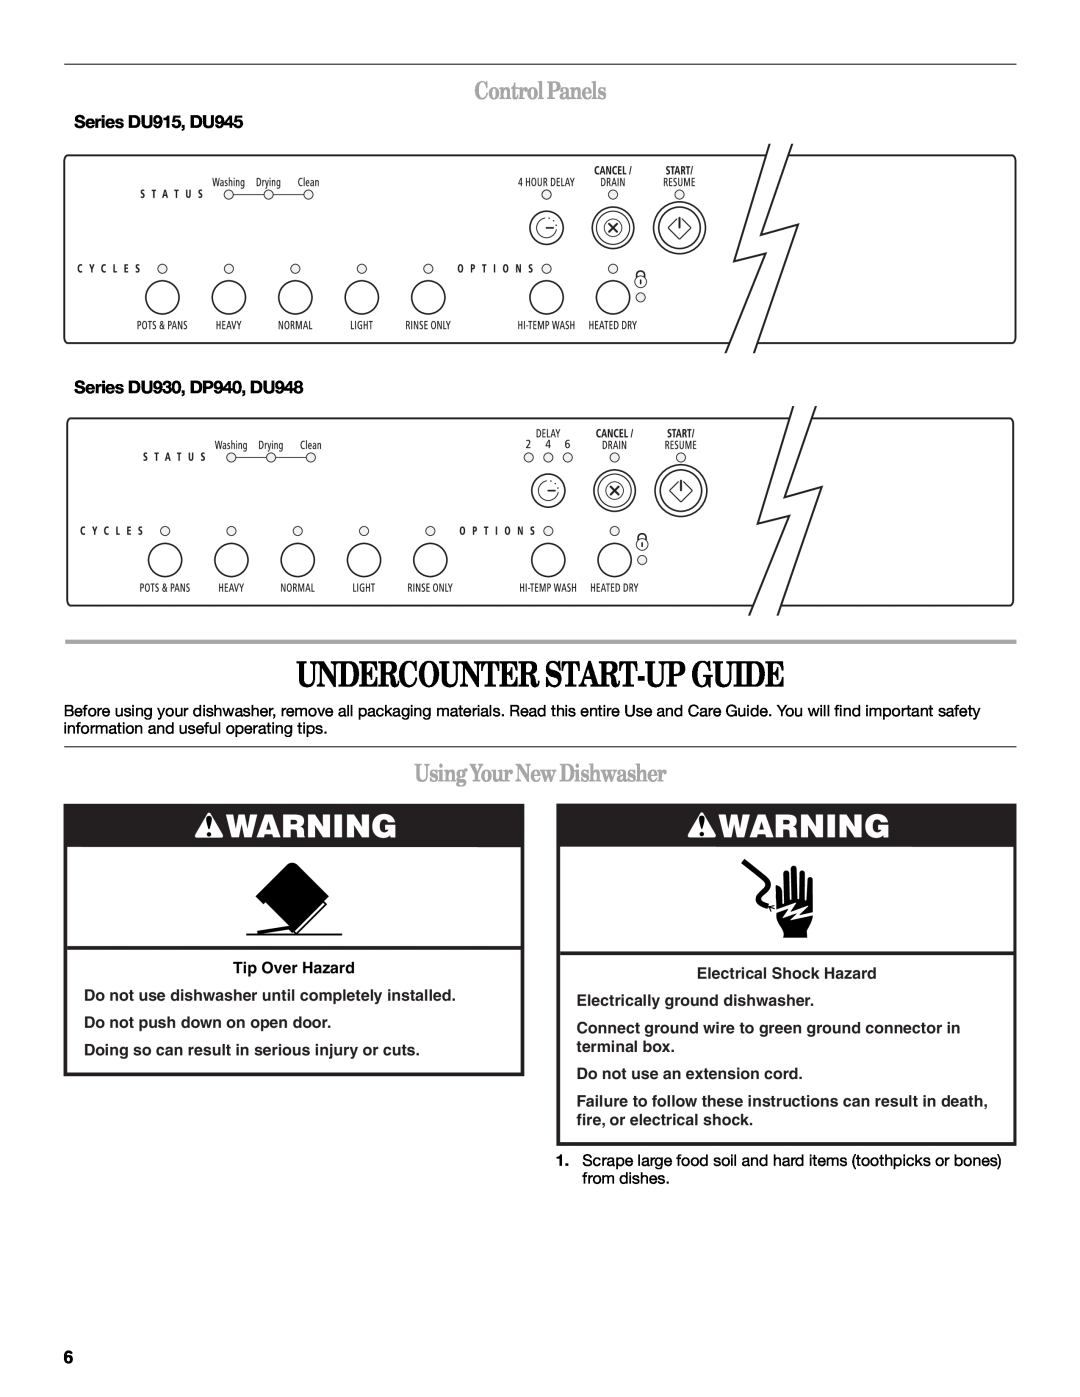 Whirlpool DP940PWS manual Undercounter Start-Up Guide, ControlPanels, UsingYourNew Dishwasher 